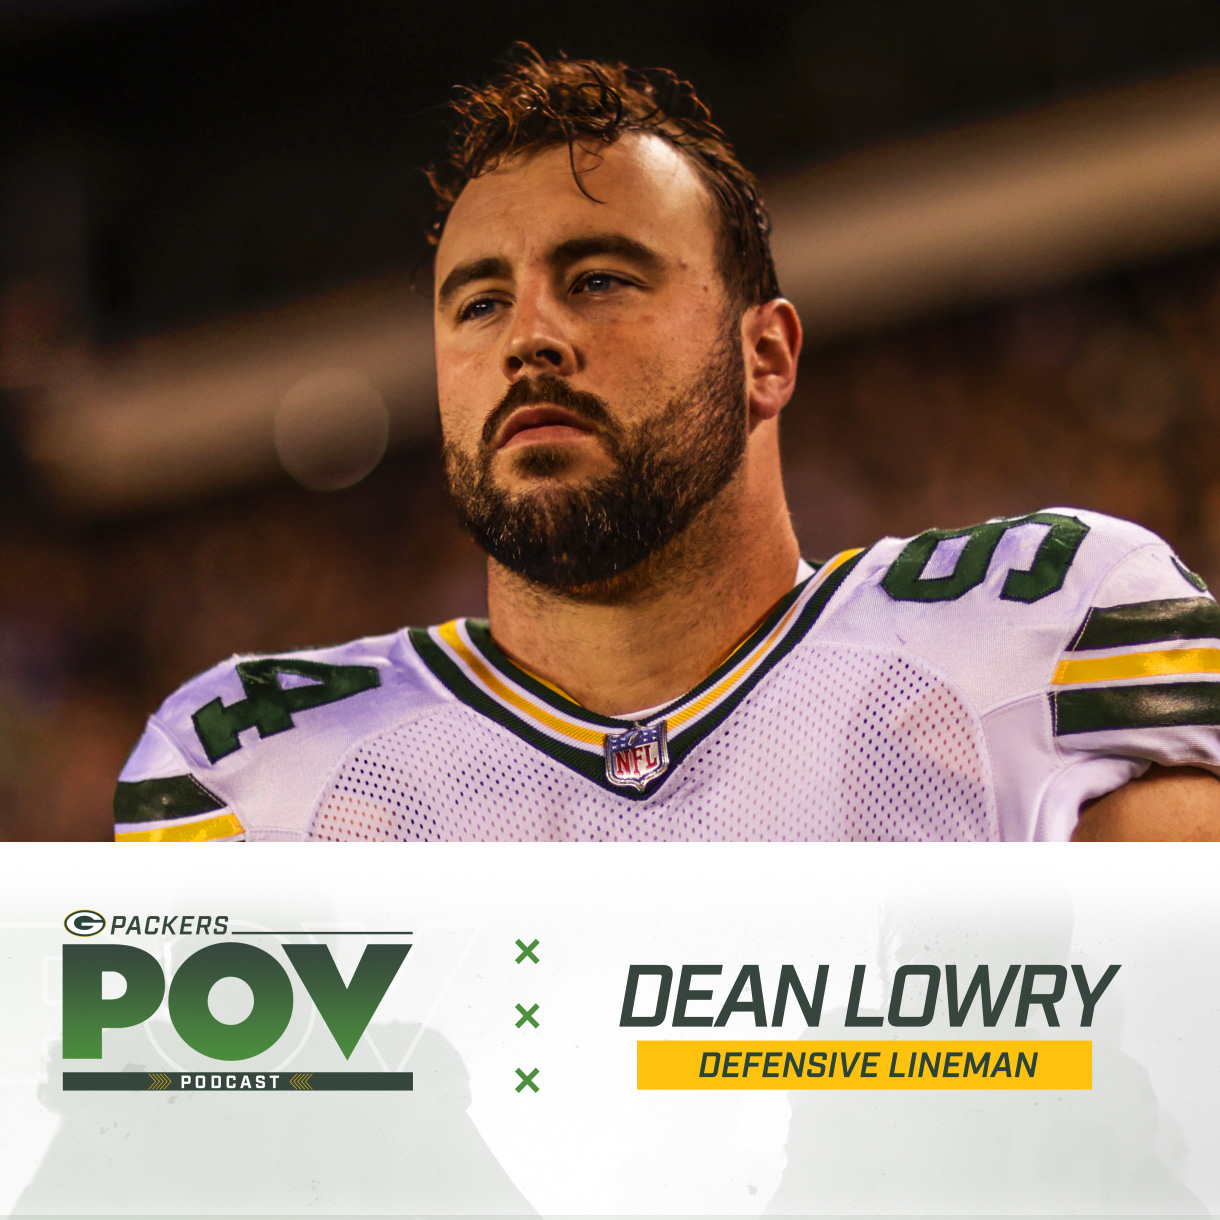 #17 Packers POV: Dean Lowry